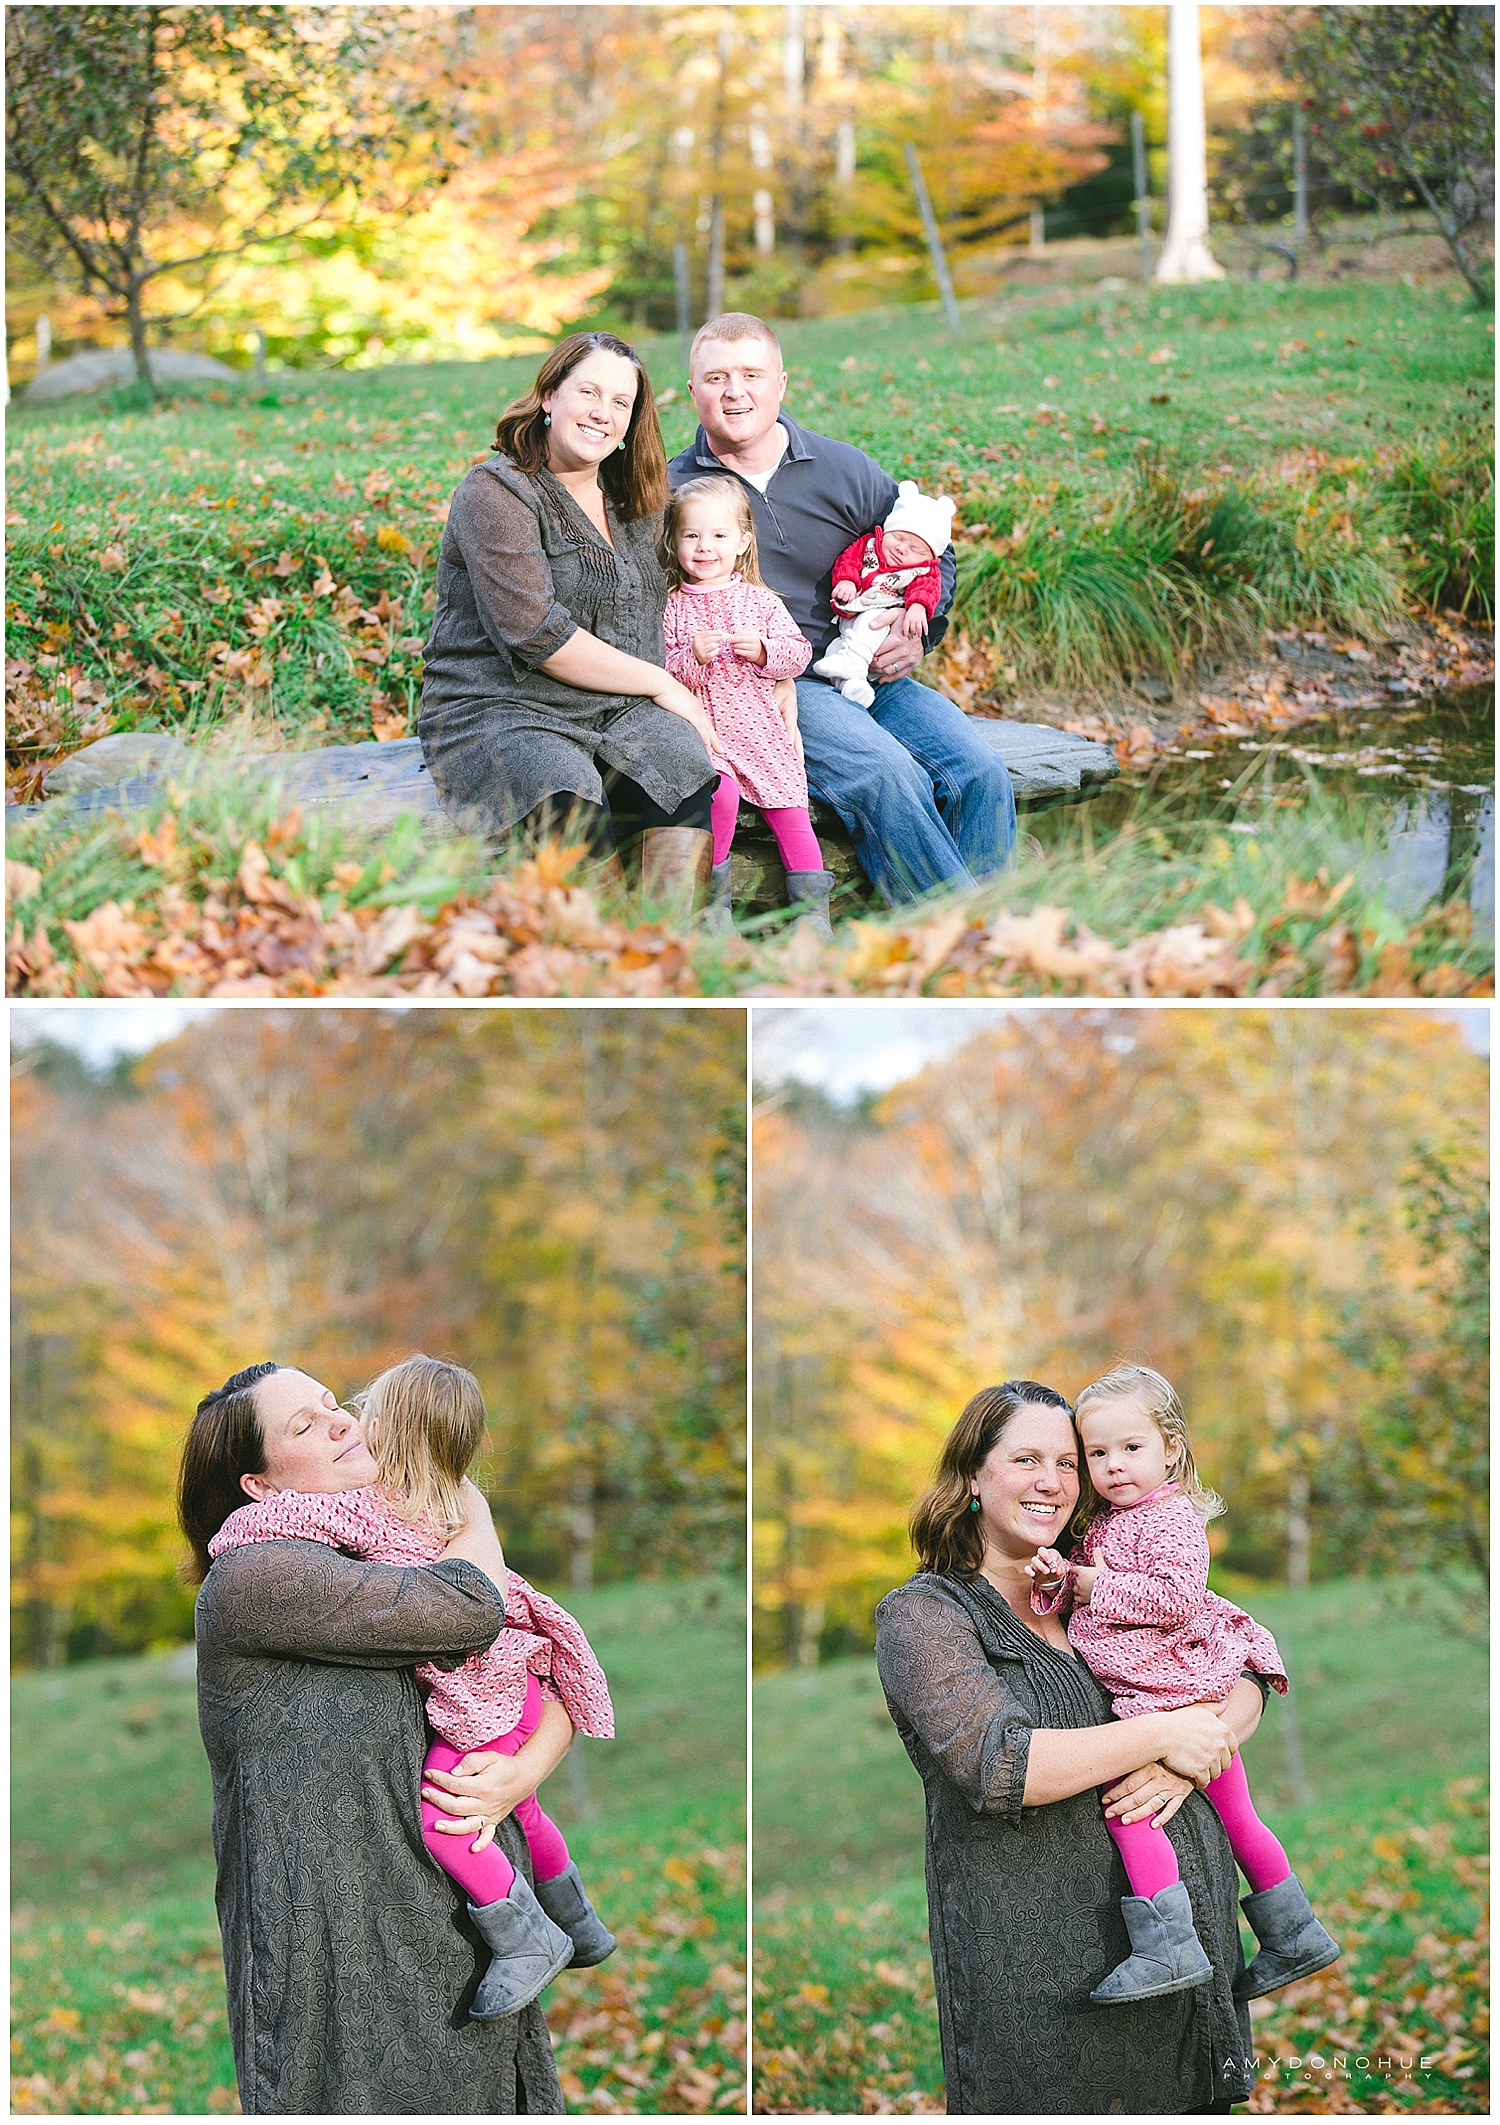 Vermont Family Photographer | © Amy Donohue Photography